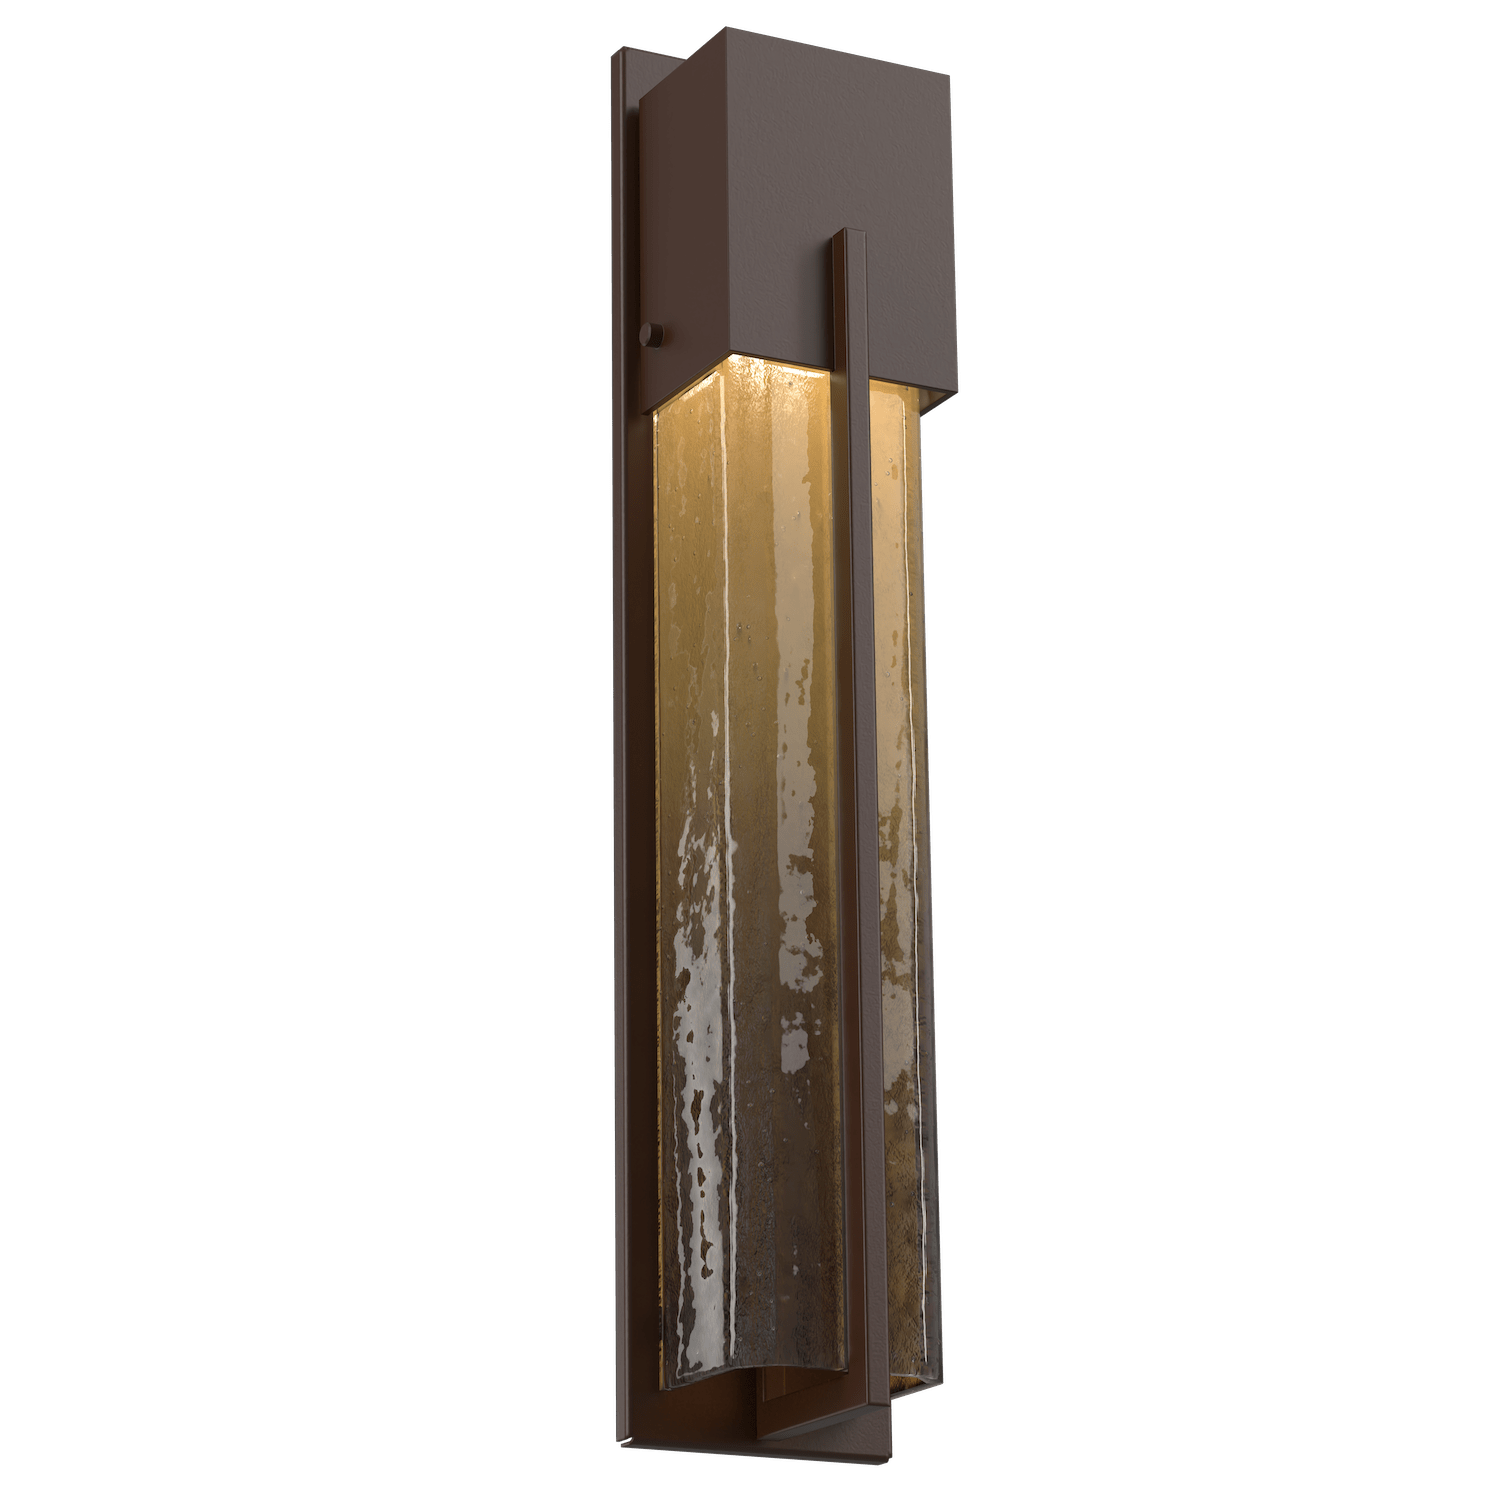 ODB0055-23-SB-BG-Hammerton-Studio-23-inch-outdoor-sconce-with-square-bronze-granite-glass-cover-with-statuary-bronze-finish-and-LED-lamping